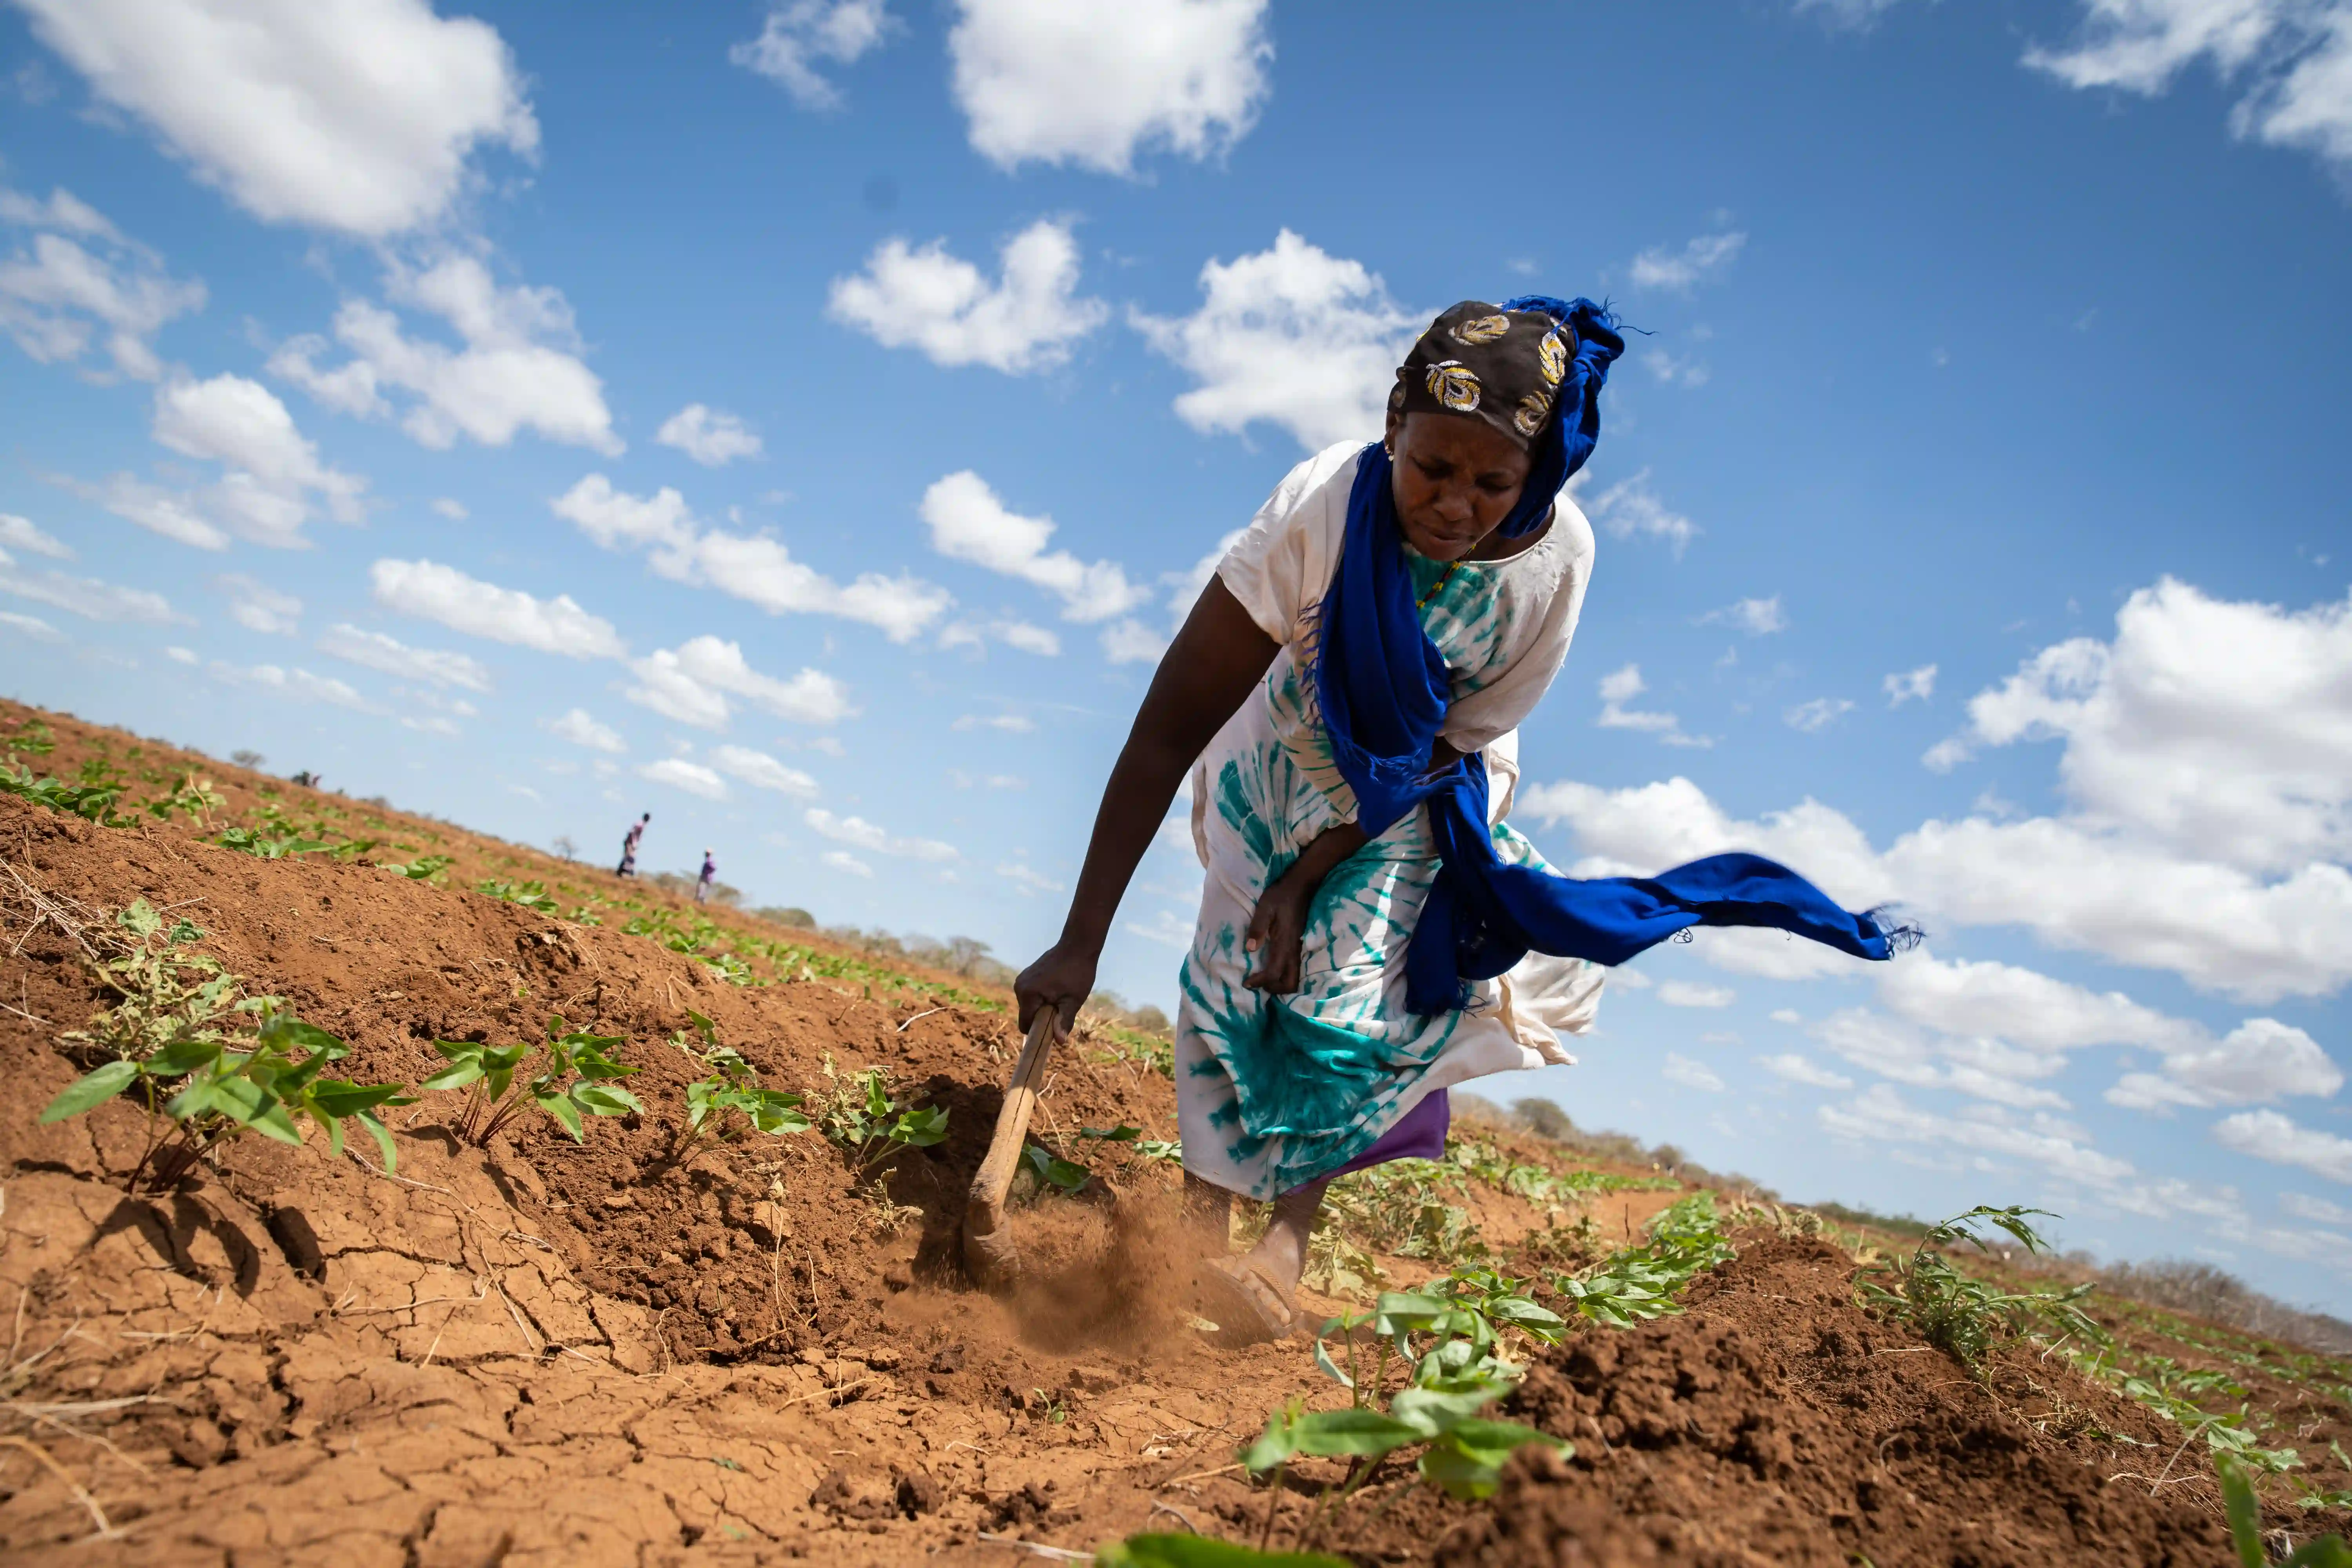 LEAF Program participant Mwanajuma Ghamaharo tends to her irrigated plot of mung beans in Makere village in Tana River County.